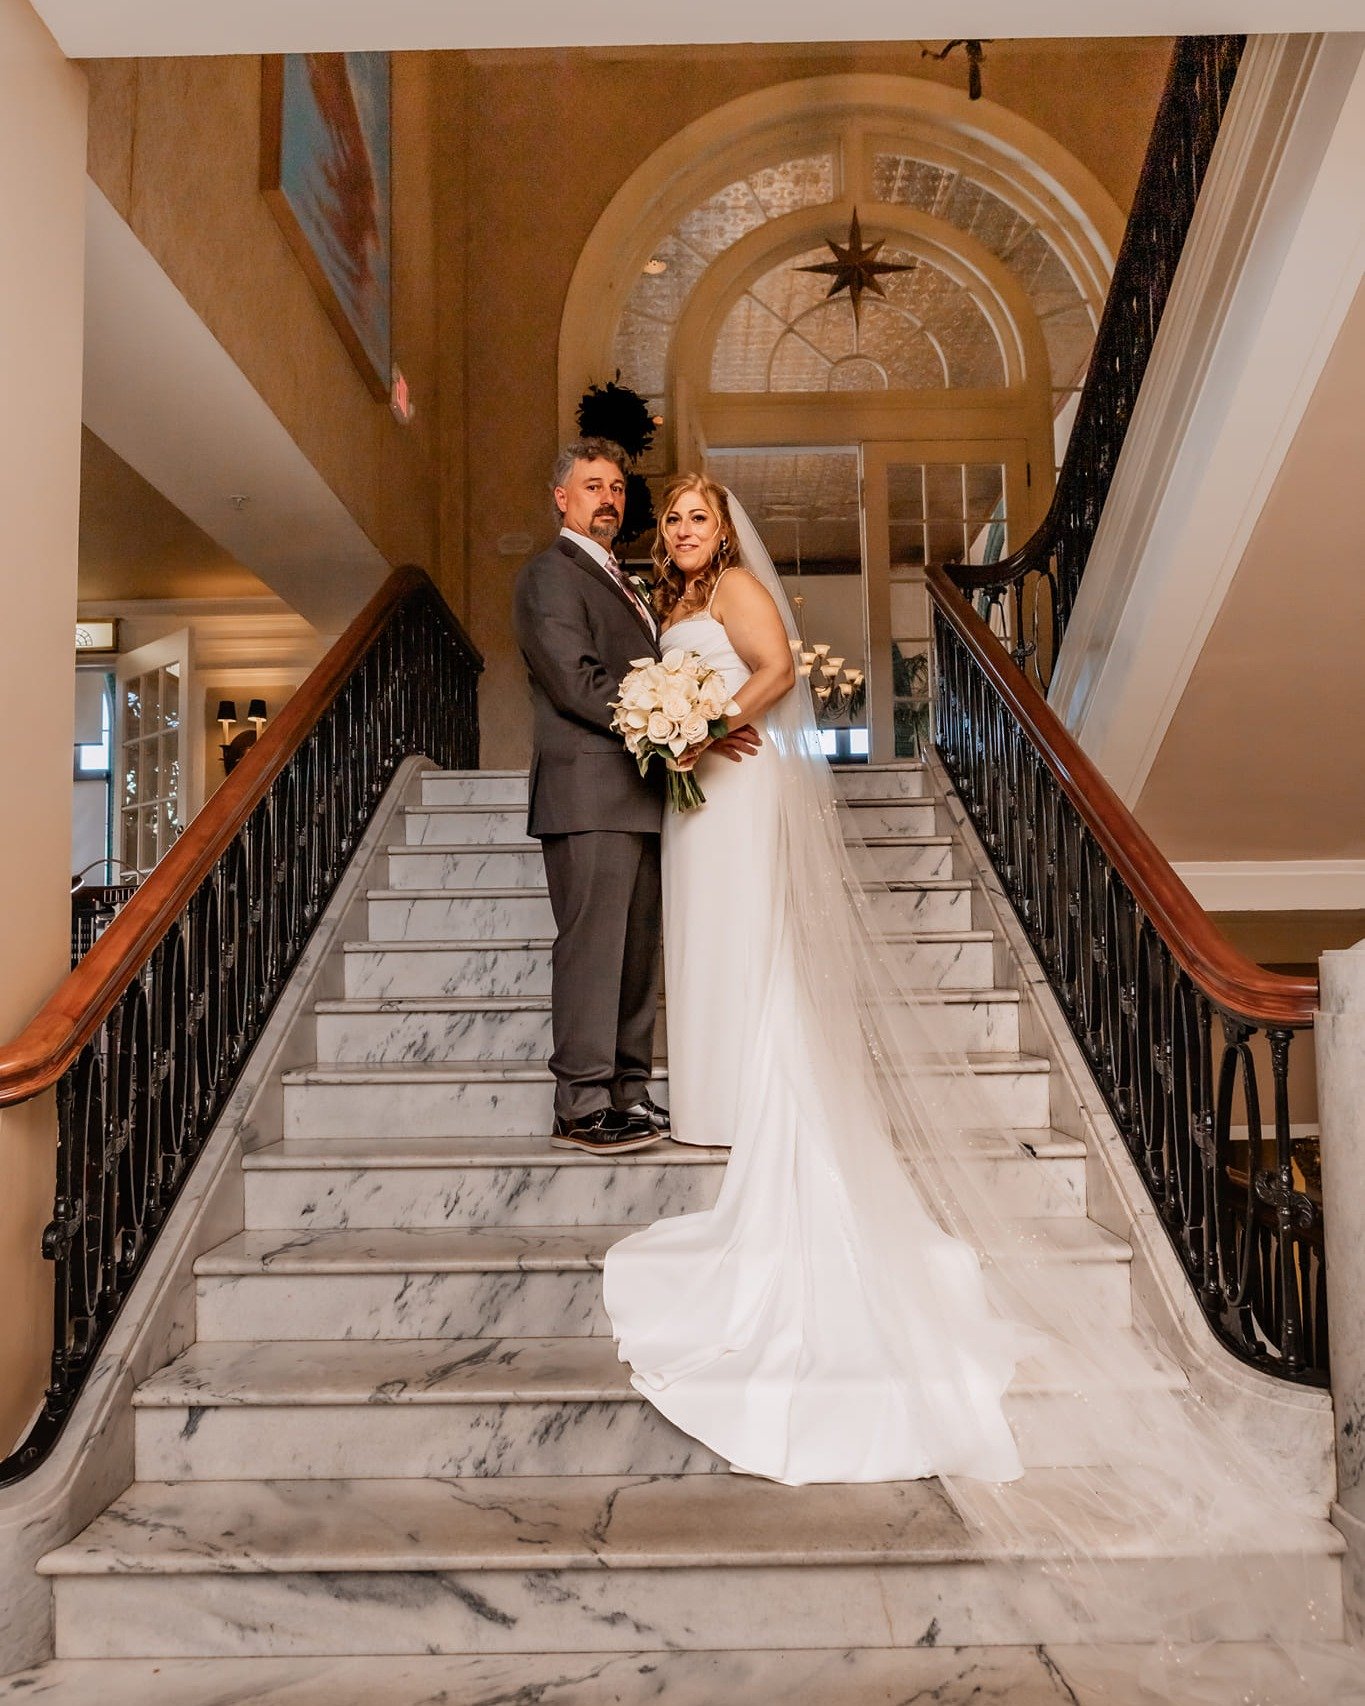 It was such an honor to have been able to capture this wedding and the location was beautiful 😍 

Www.michalareberphotography.com/weddings

#weddingphotographer #schuylkilllcountyphotographer #historichotelbethlehem #bridegroomphotography